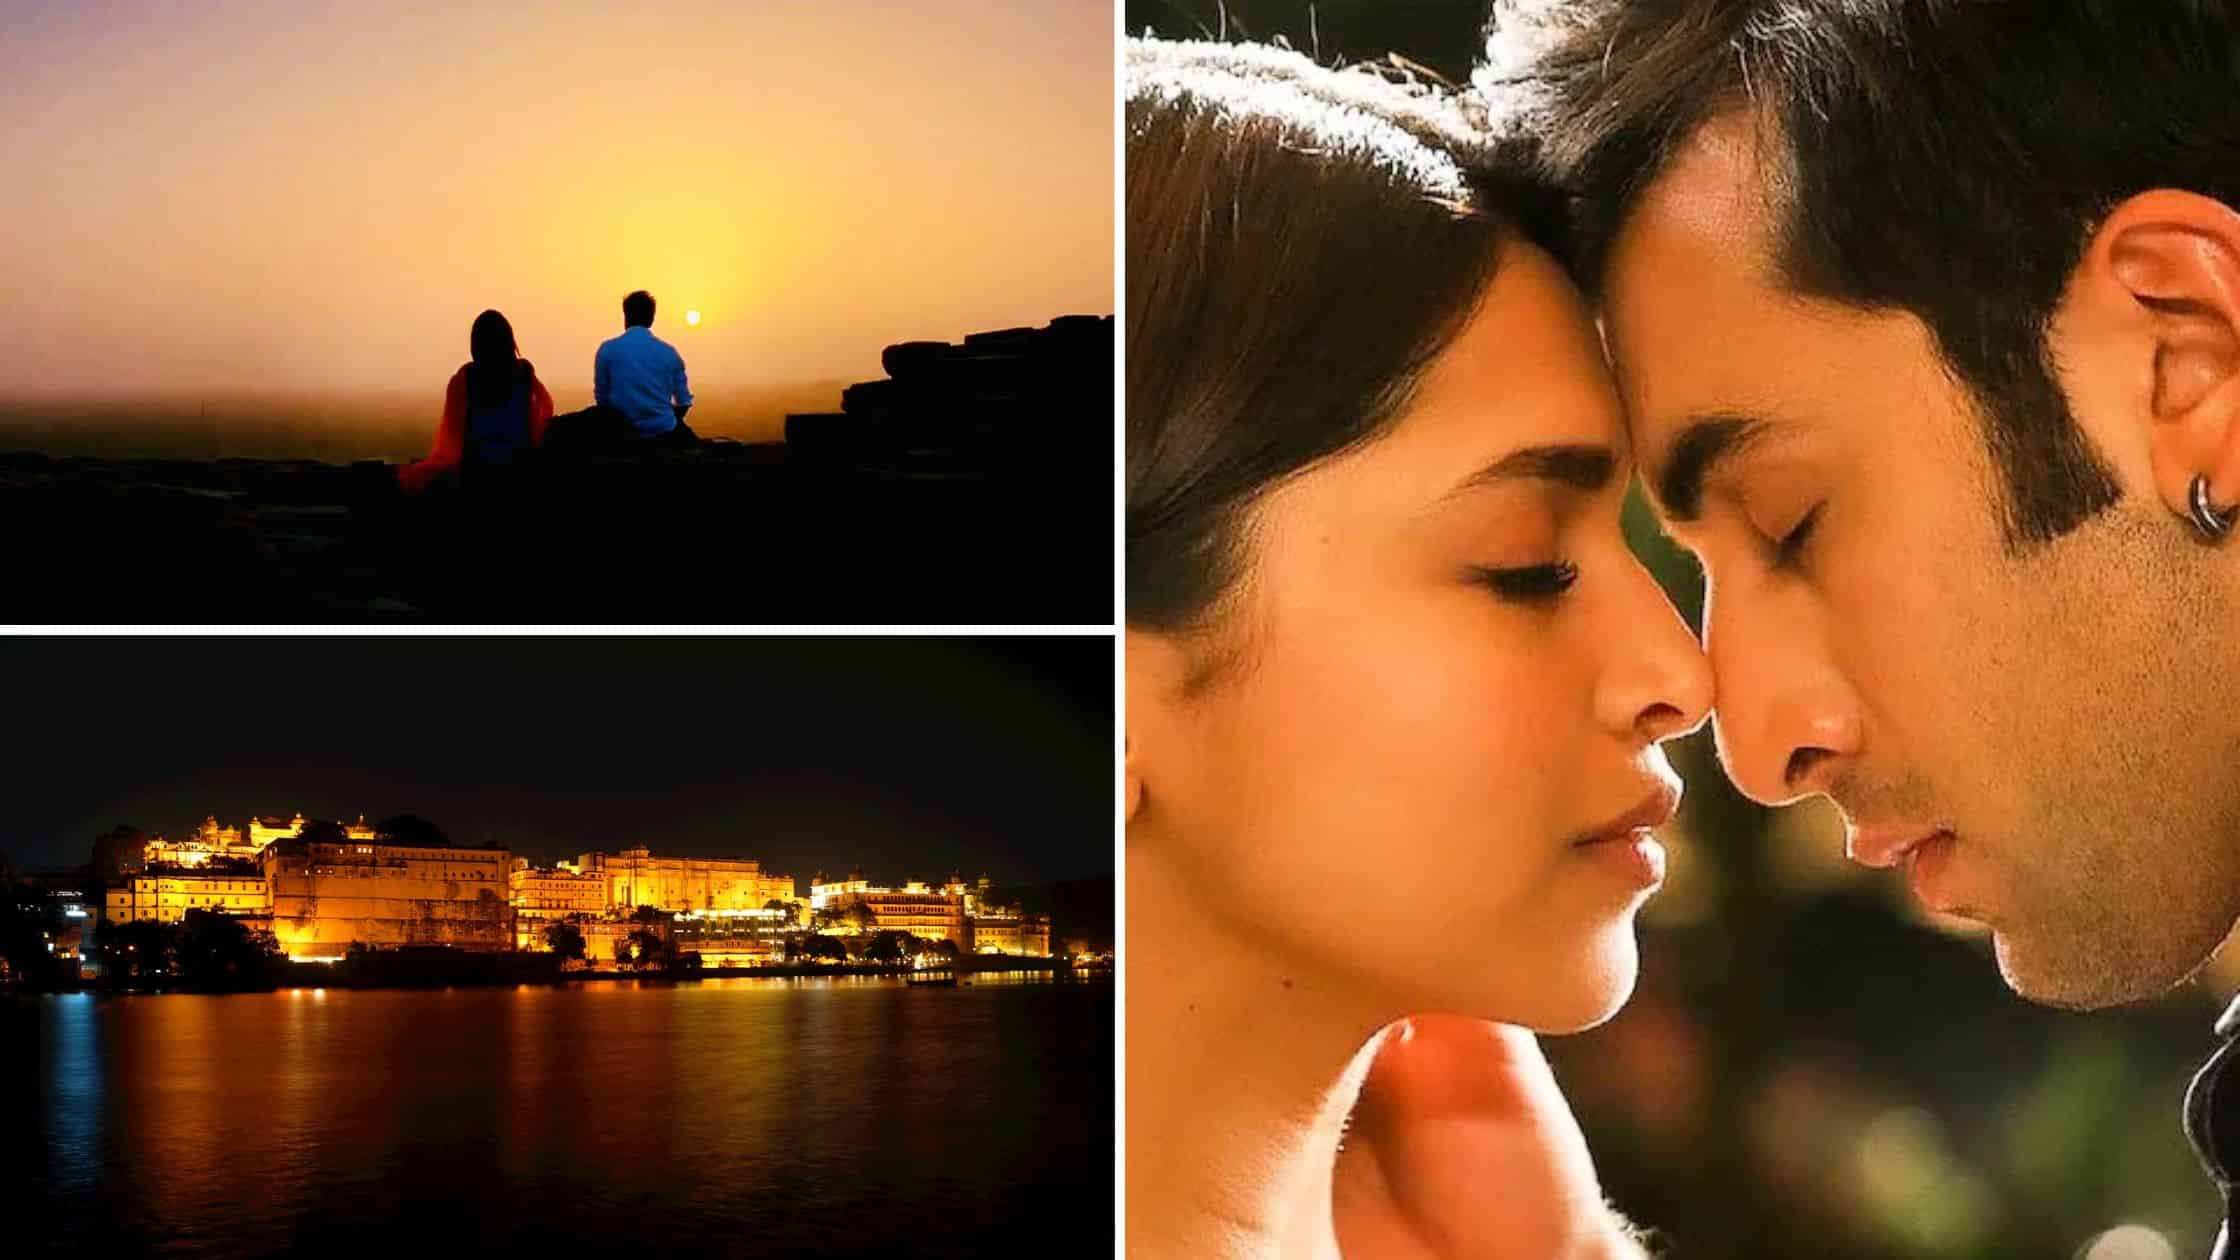 5 Amazing Bollywood Films-Inspired Travel Destinations